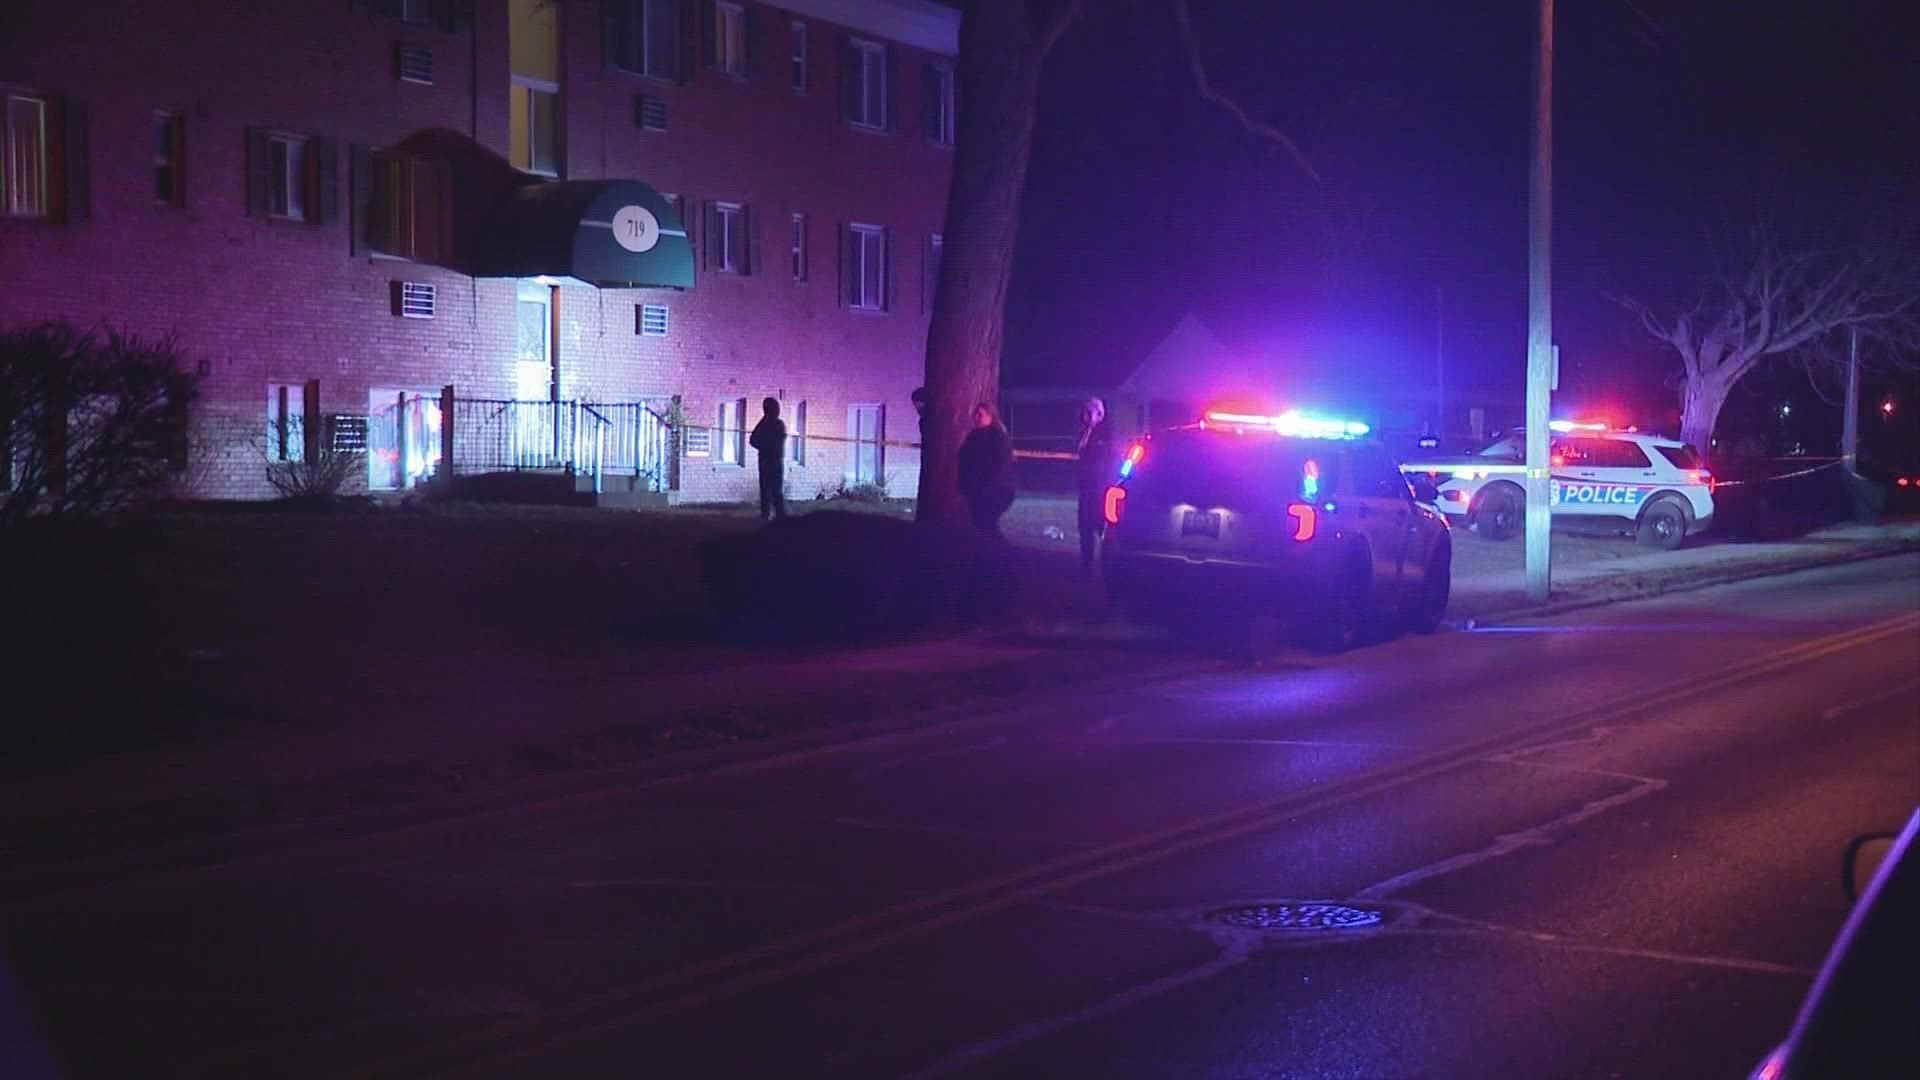 Columbus police said the shooting happened around 10:30 p.m. in the 700 block of Wedgewood Drive.